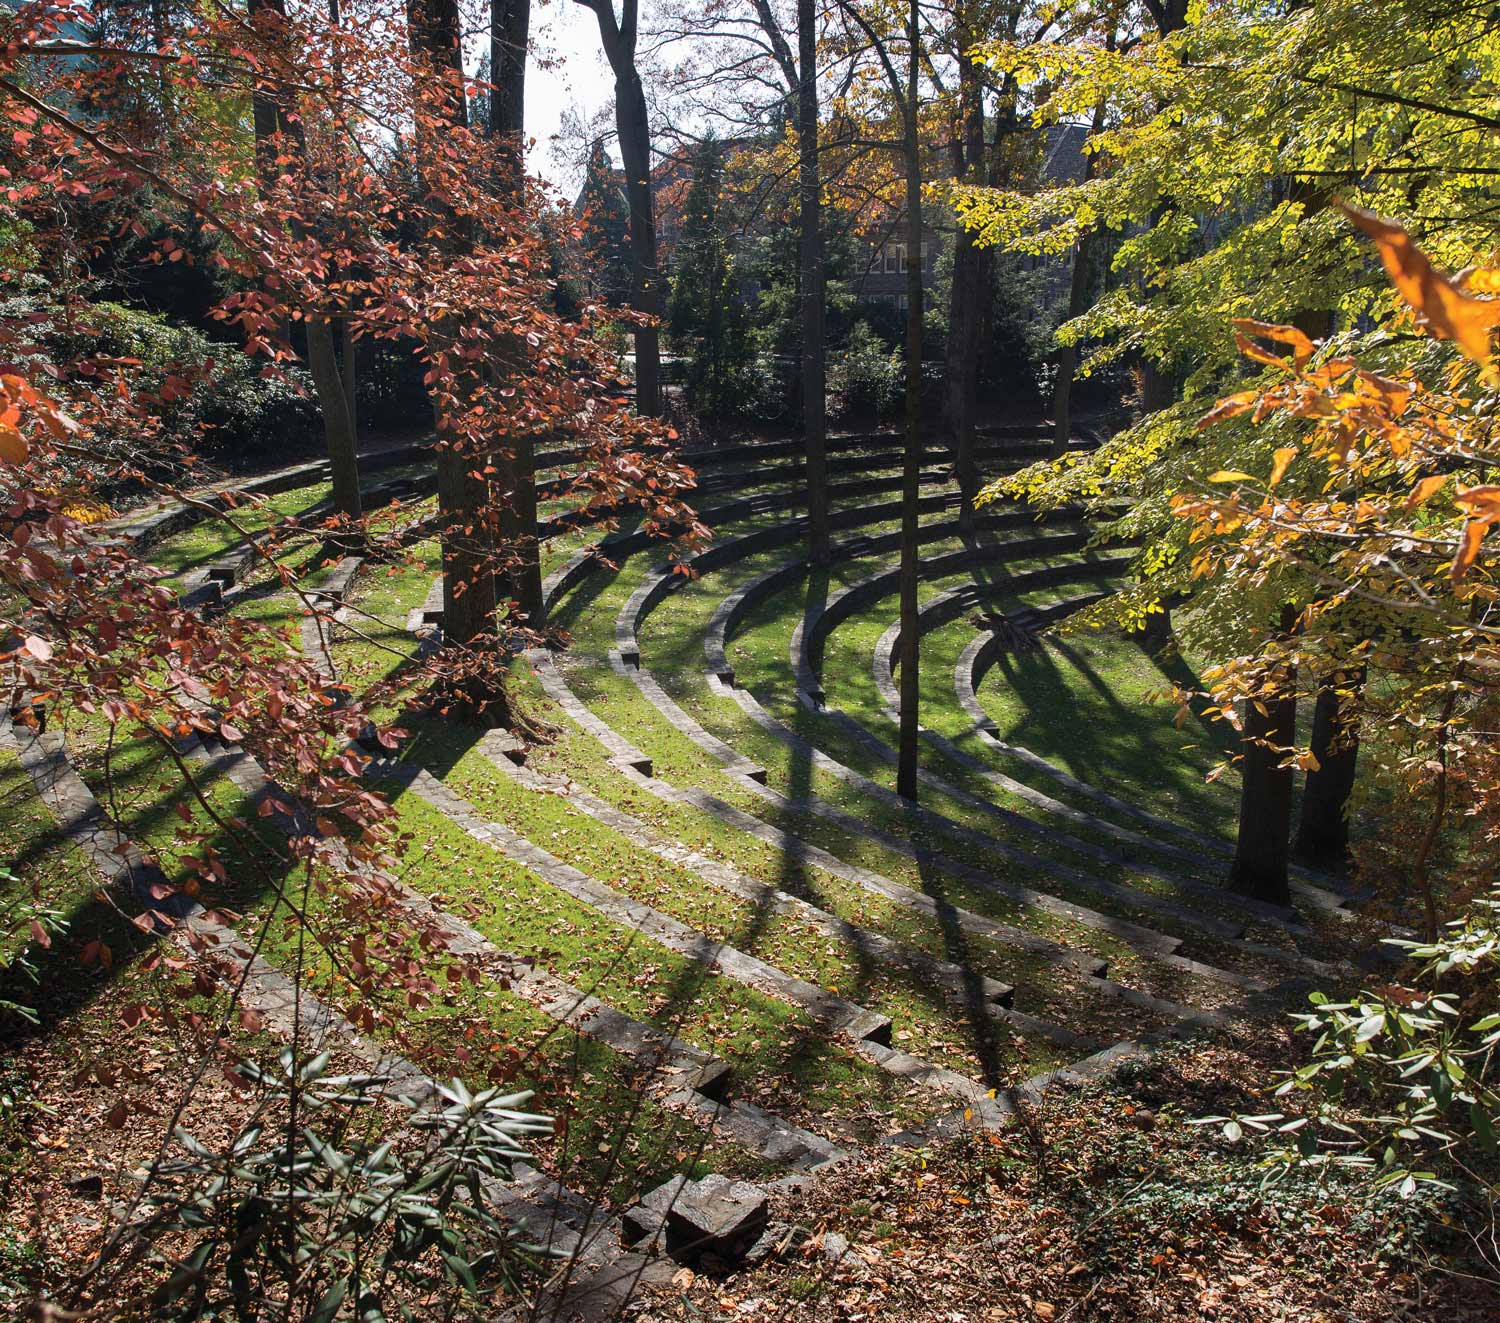 outdoor amphitheater on Swarthmore campus